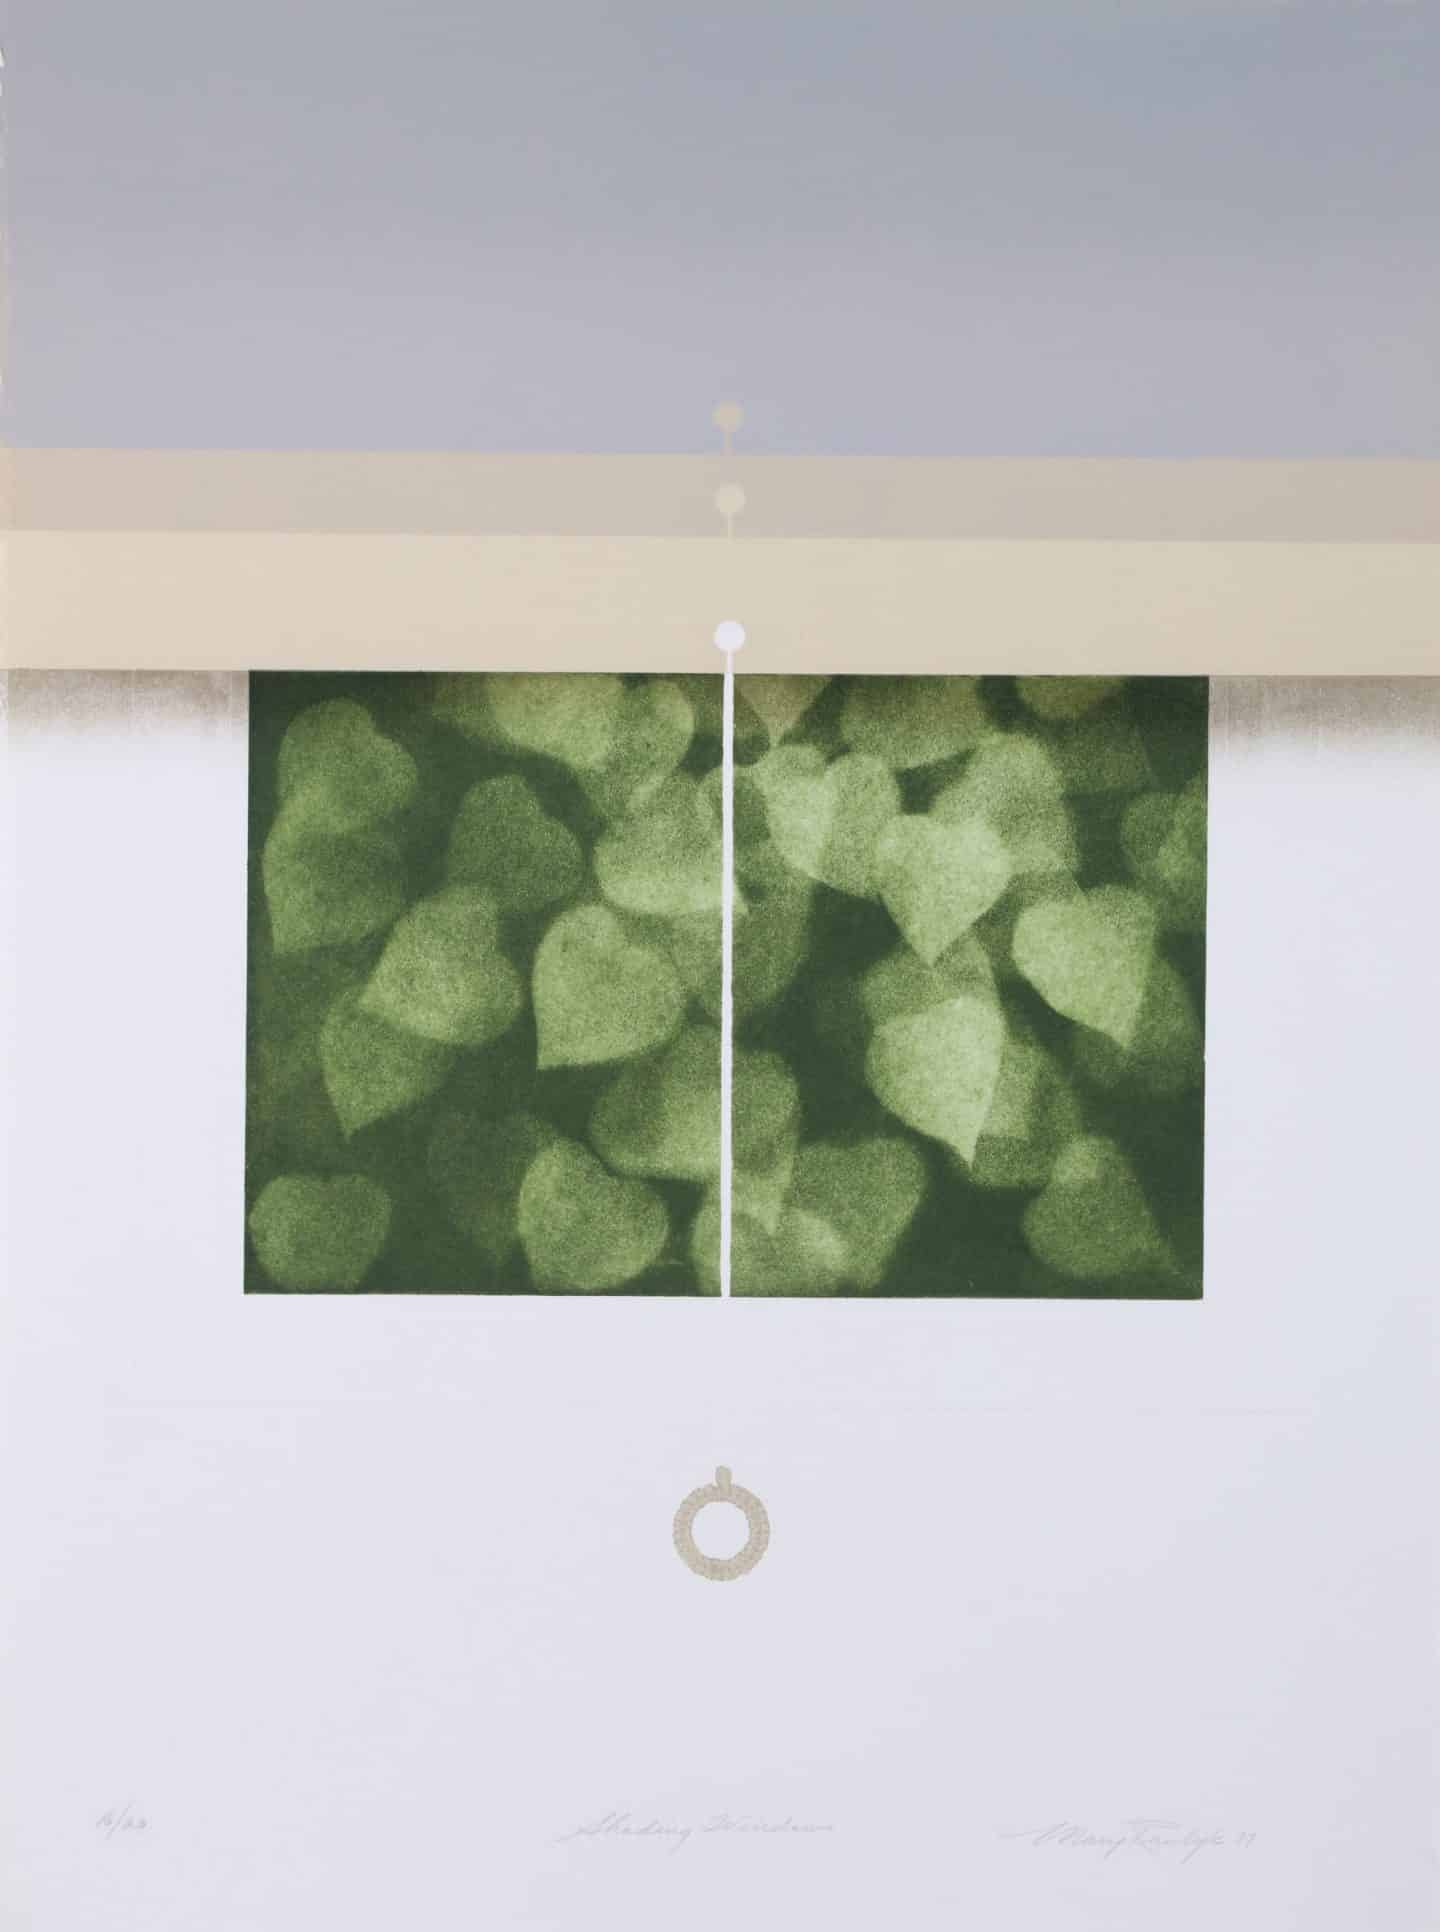 Mary E. Rawlyk, Shading Window, 1977, intaglio and card relief and embossing on paper. Gift of Mary Rawlyk in memory of Natalie Luckyj, 2002 (45-023.16)